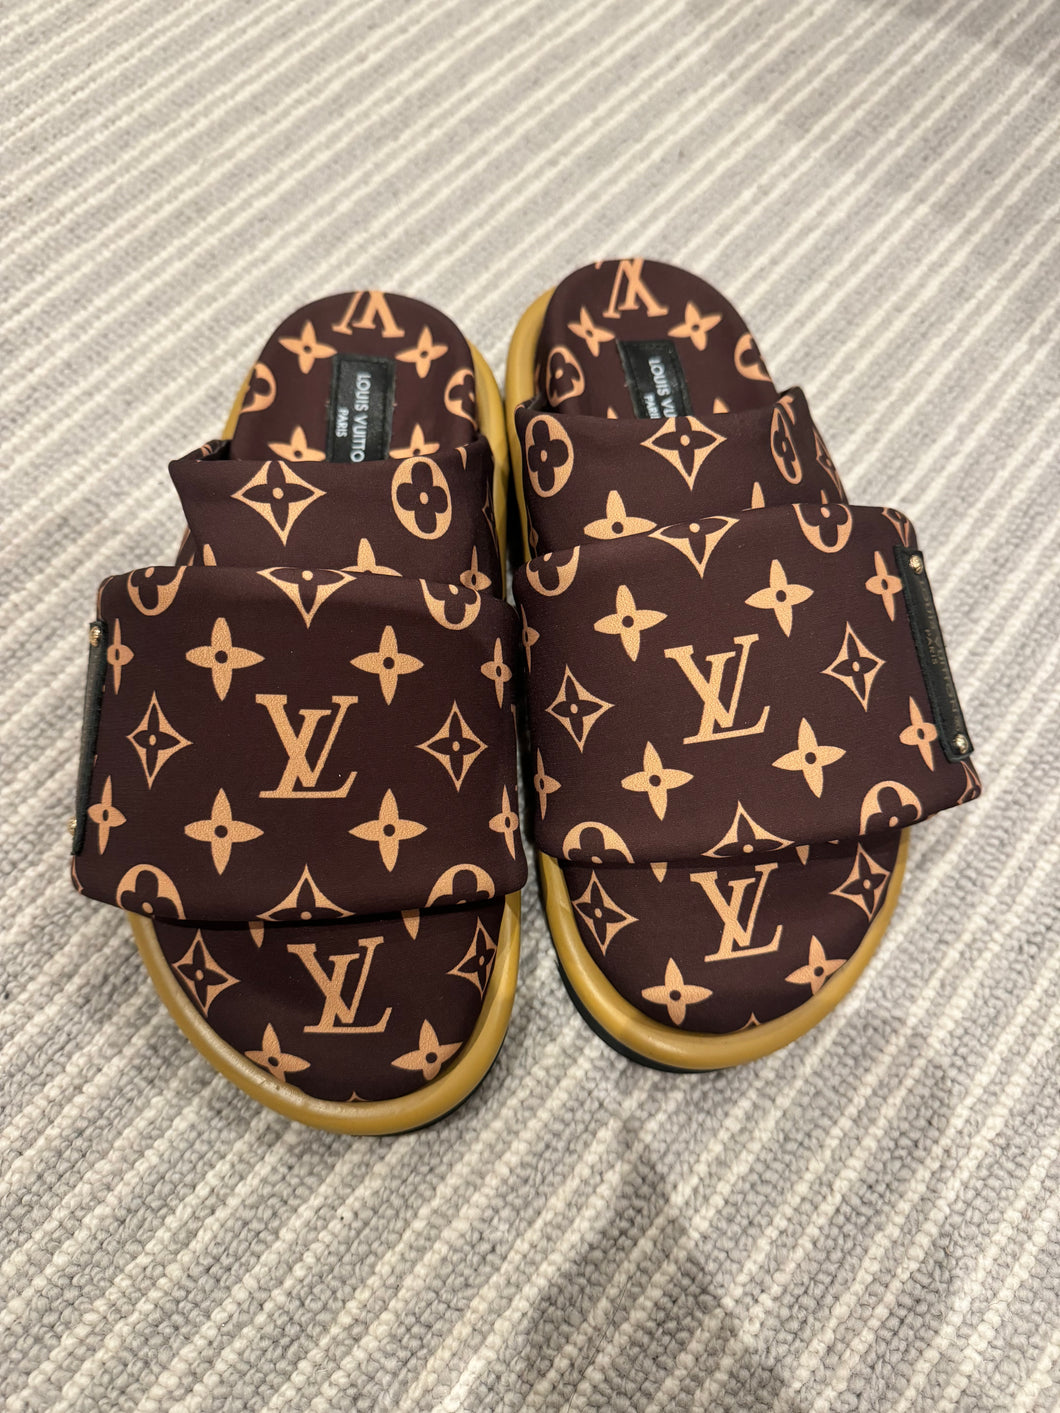 Success & Wealth Louis Vuitton Closed Toe Slippers For Career, Money, Achieving Dreams & Life Goals Law of Attraction UK Size 4 // EU 37 // US 6.5